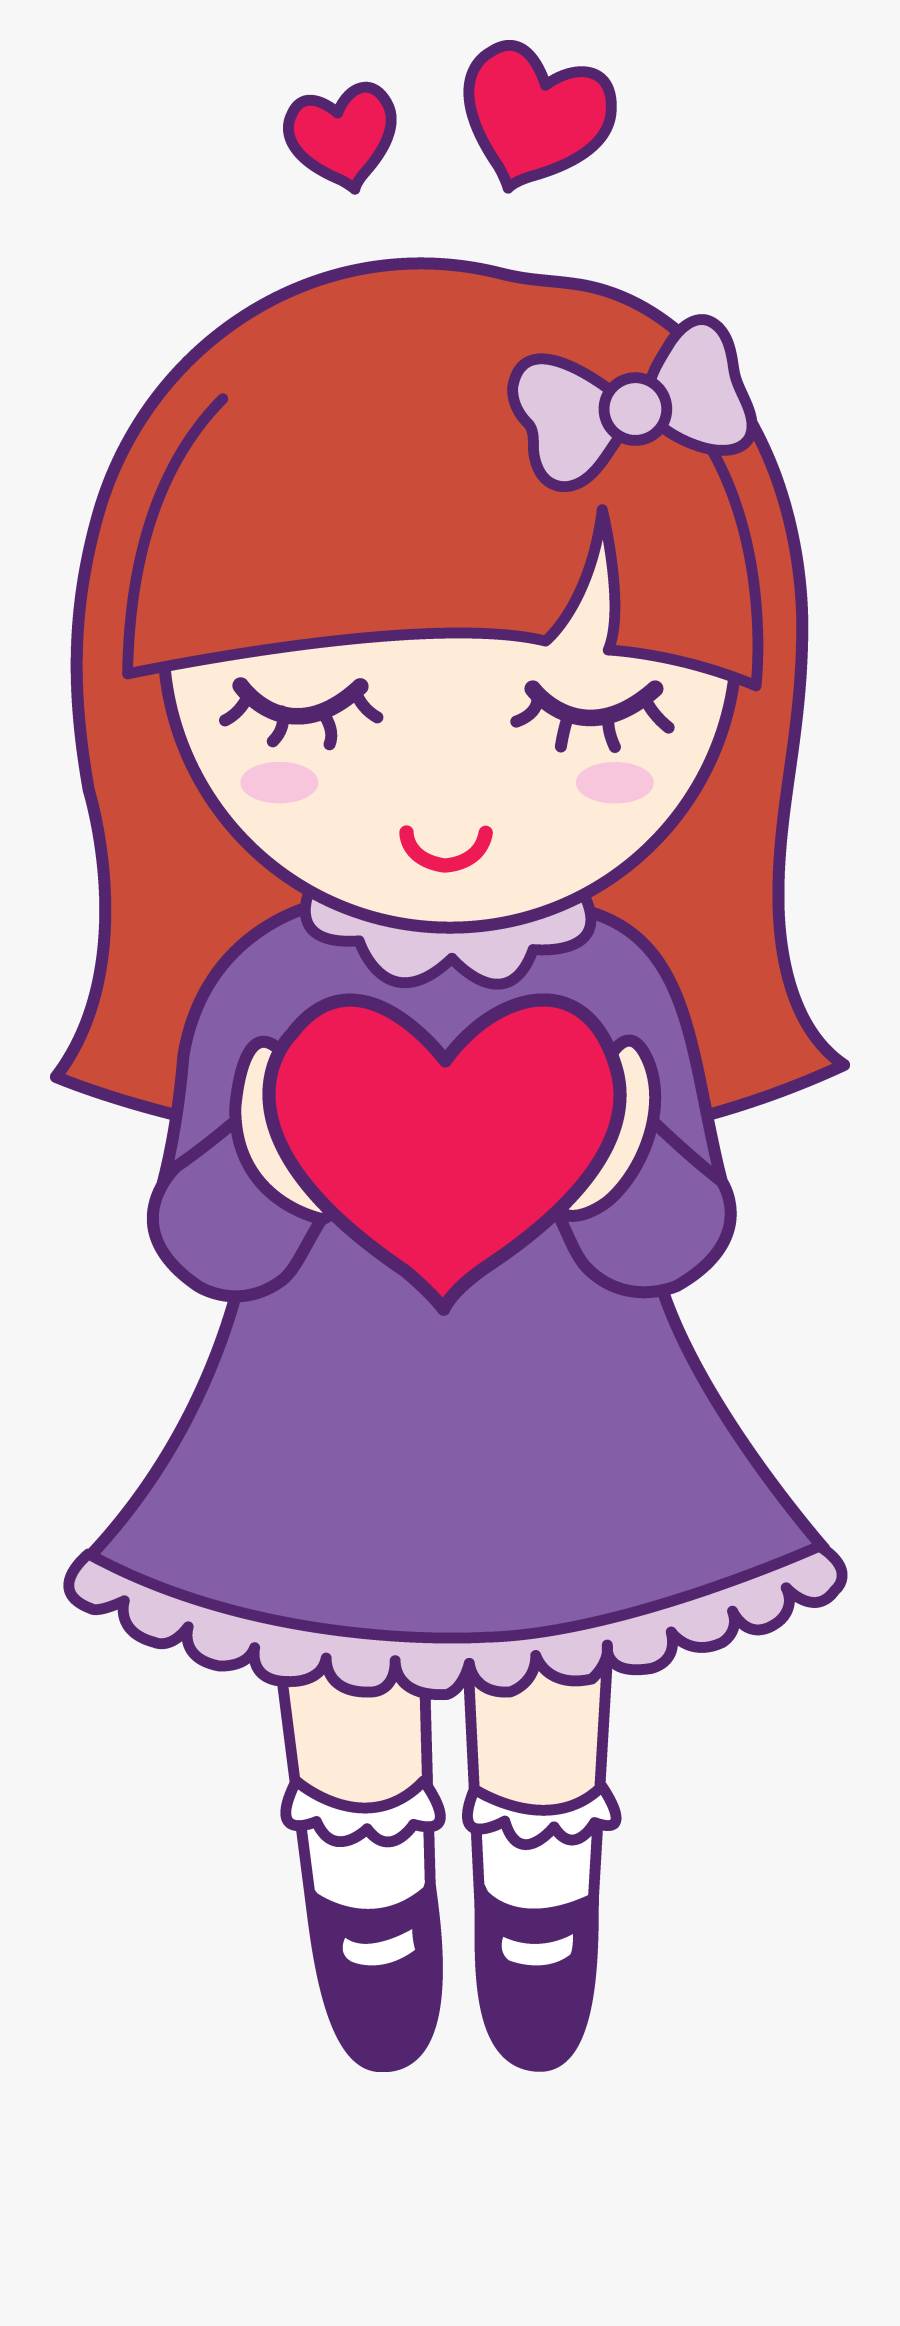 Free Girl Clipart - Girl Holding Heart Clipart, Transparent Clipart